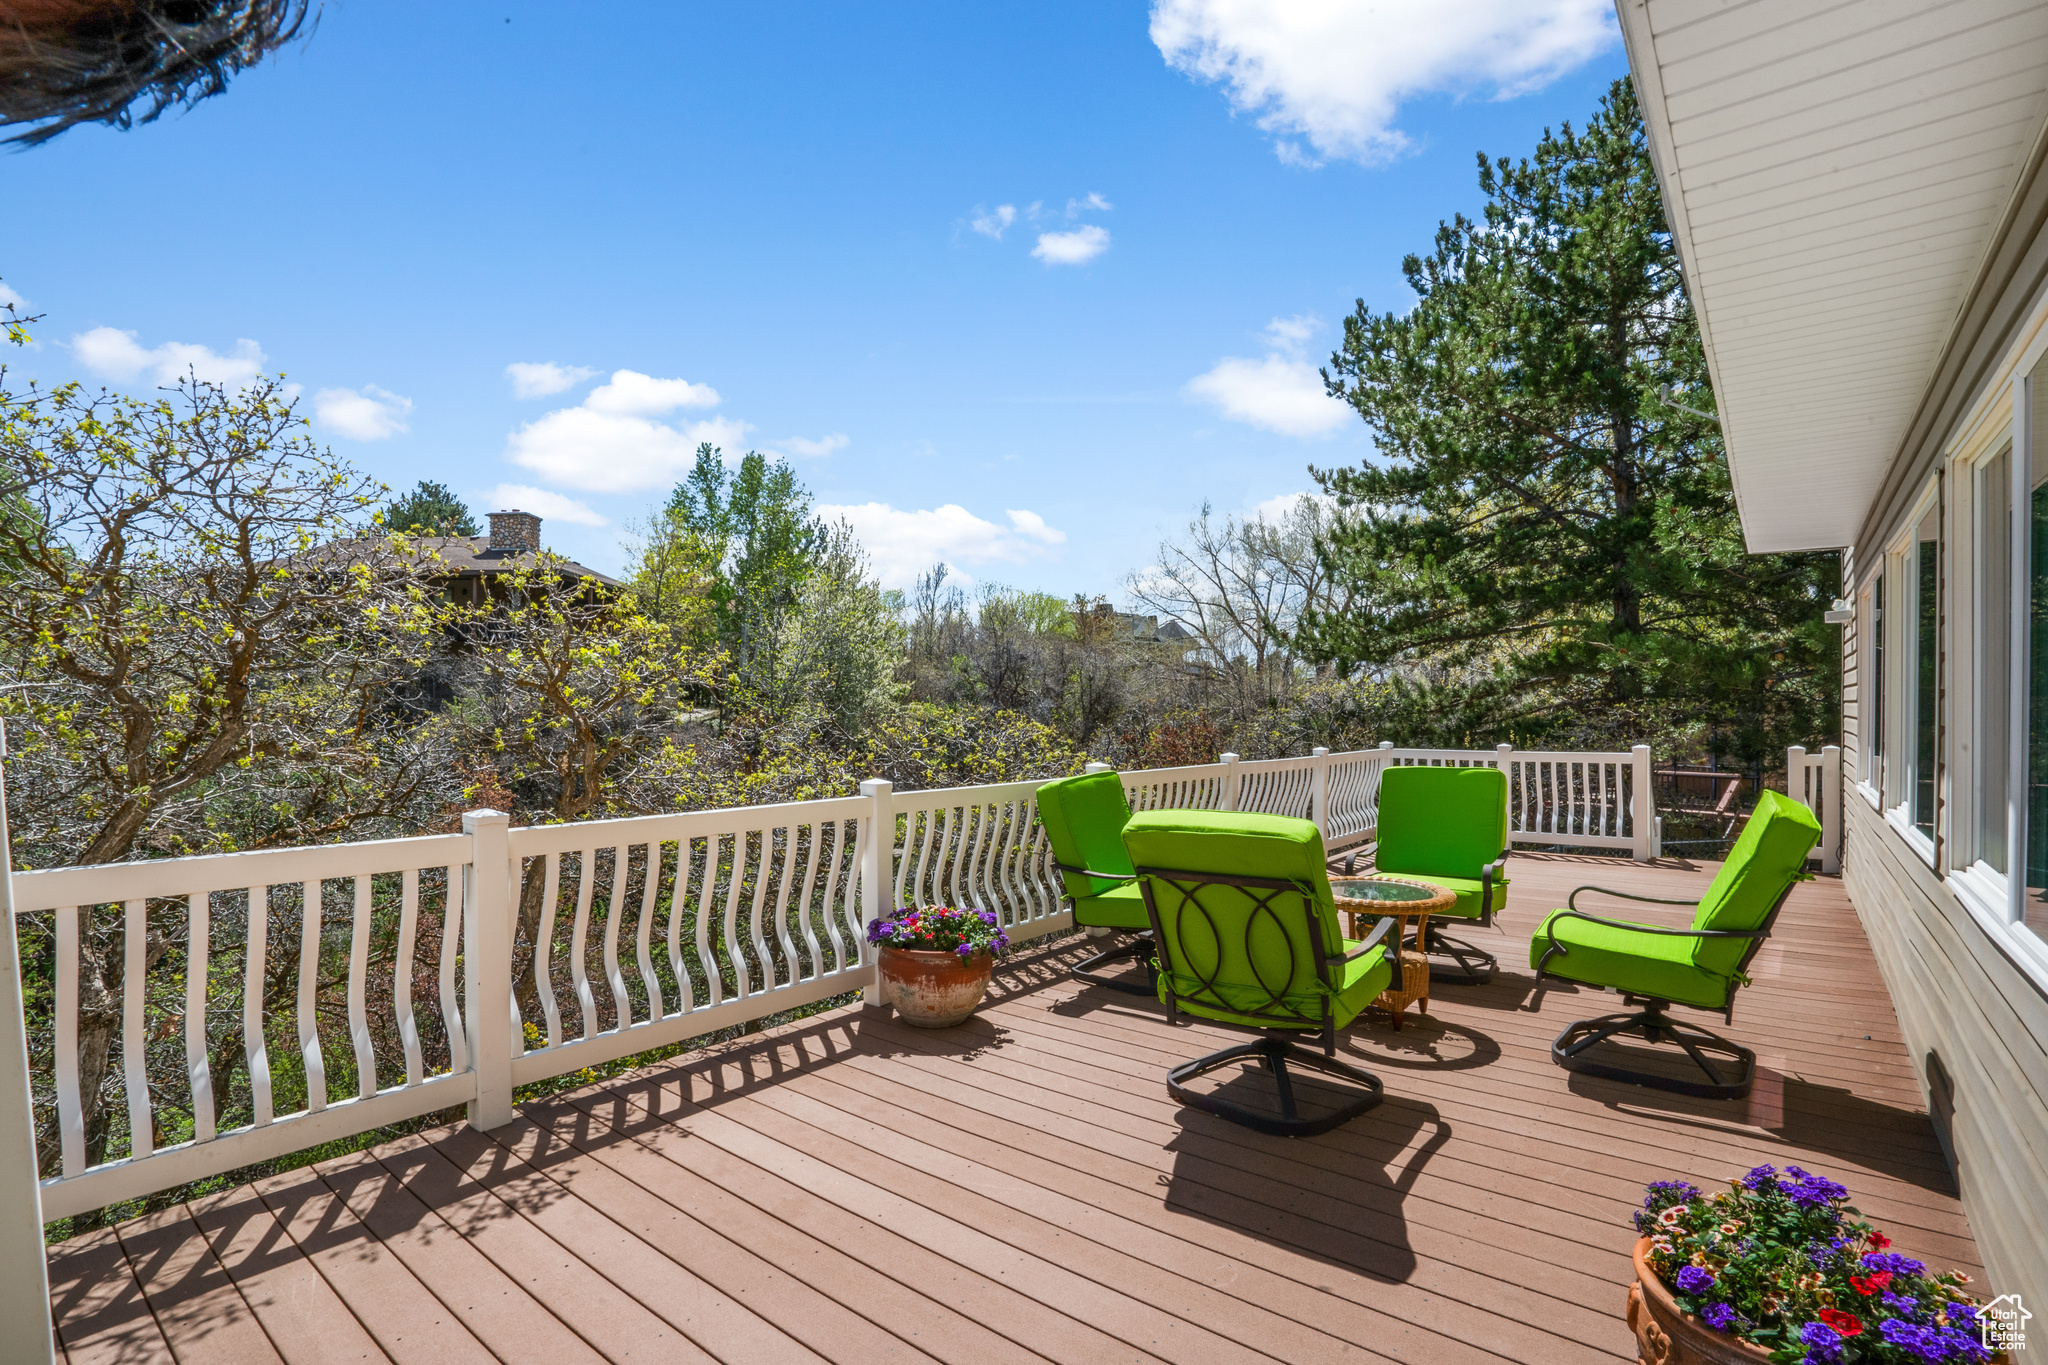 Step Outside onto this deck from the Family Room